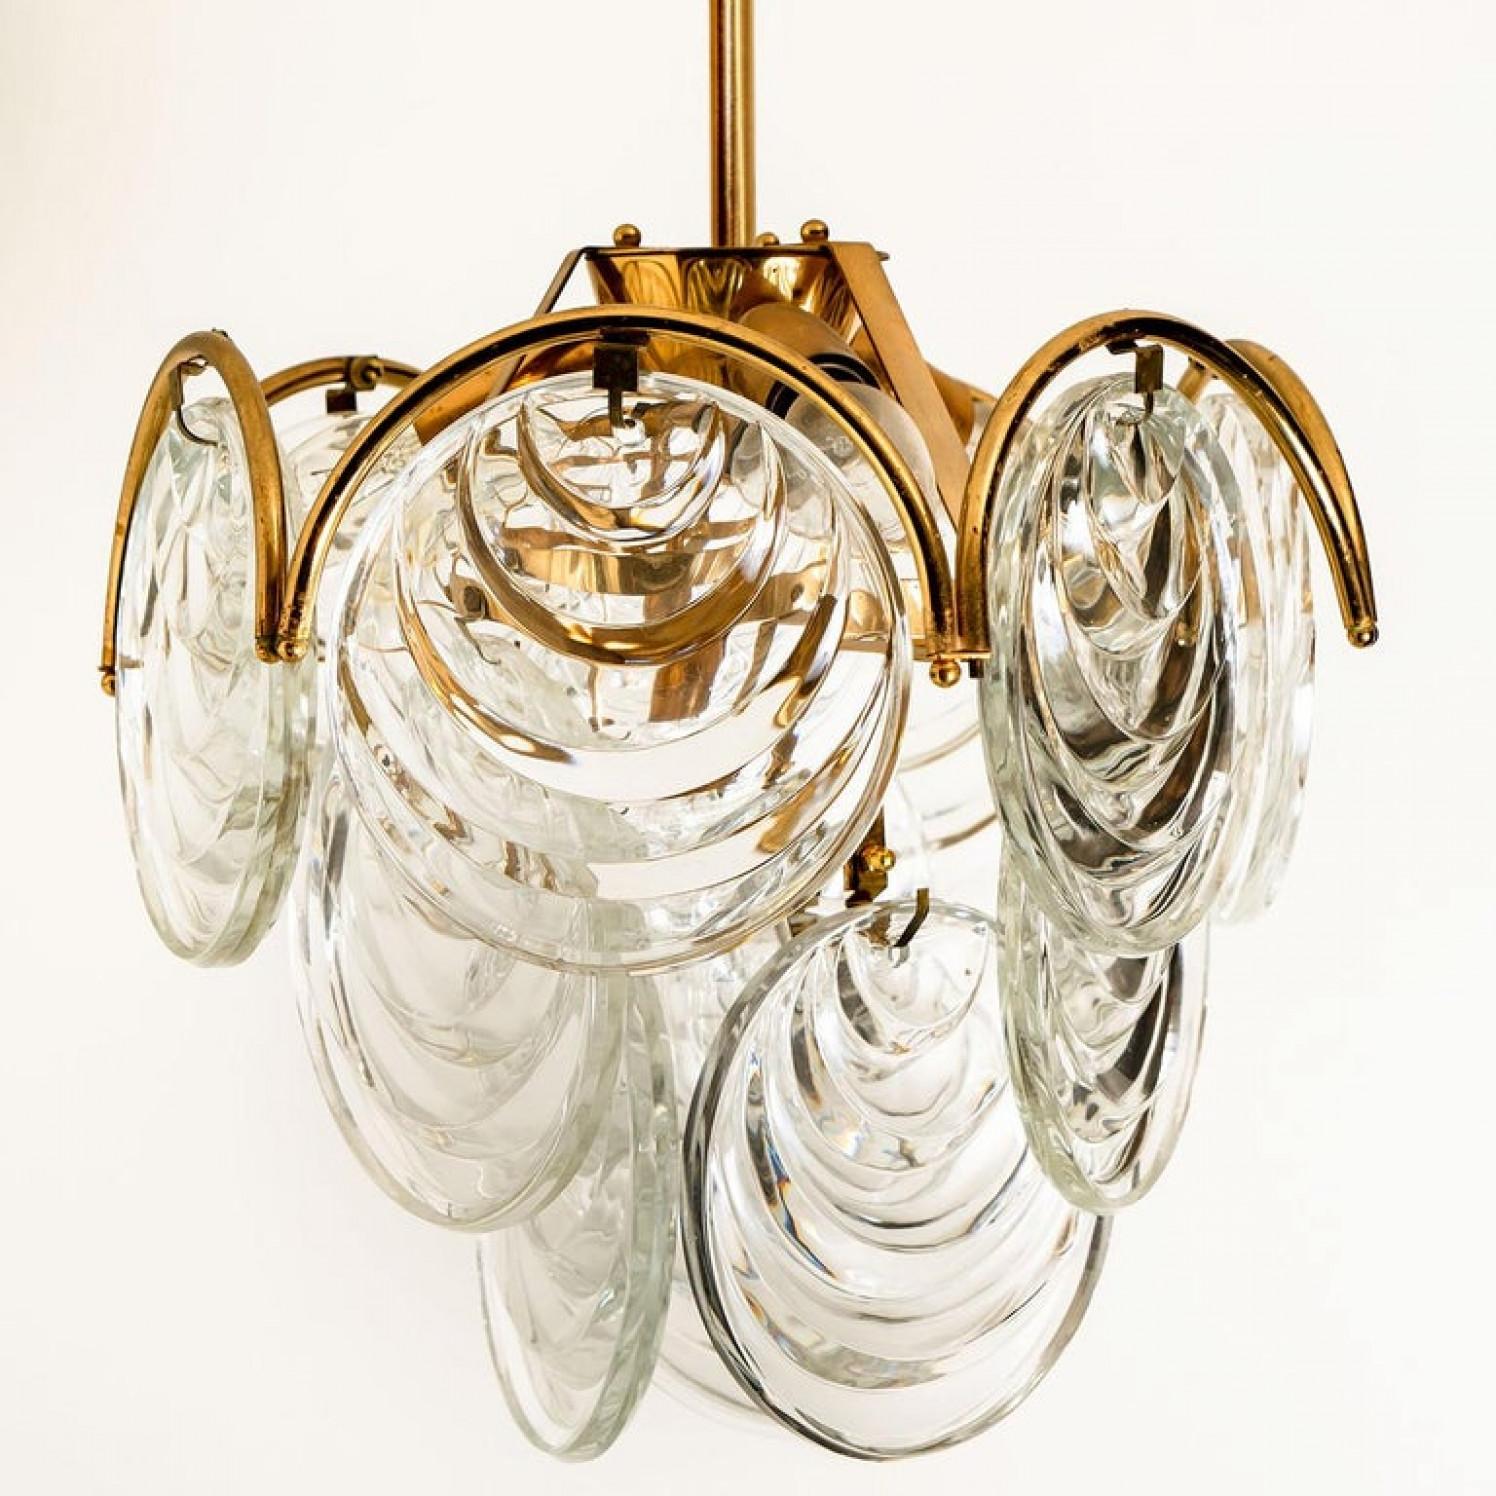 German 1 of the 2 of Glass and Brass Two Tiers Light Fixtures, 1970s For Sale